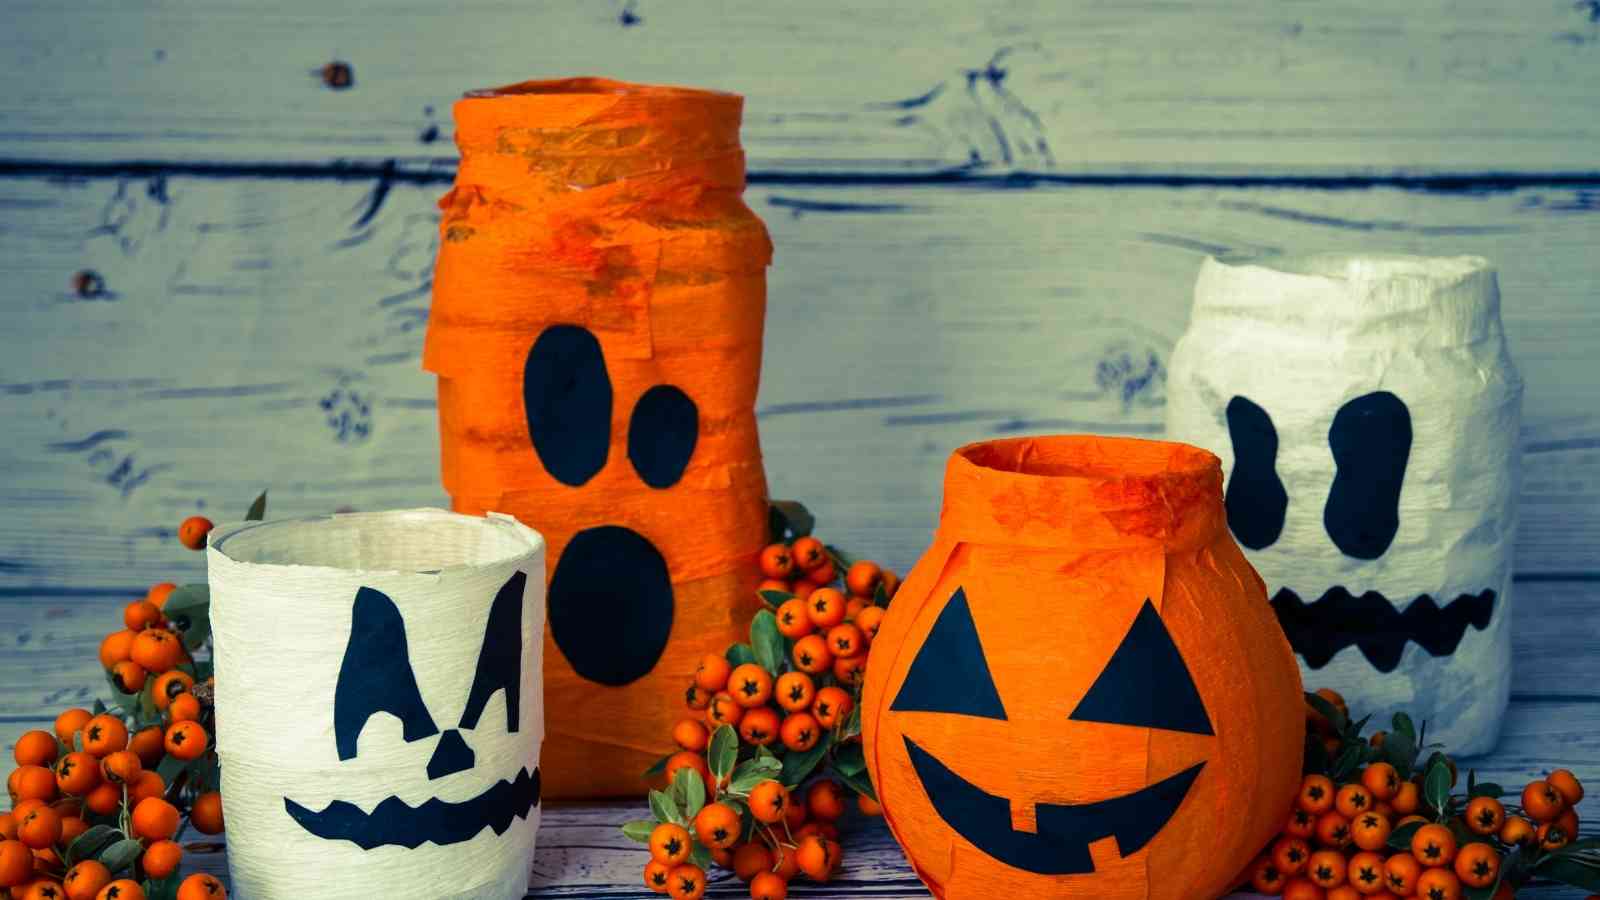 Creative Halloween Decoration Ideas Using Recycled Trash Bags